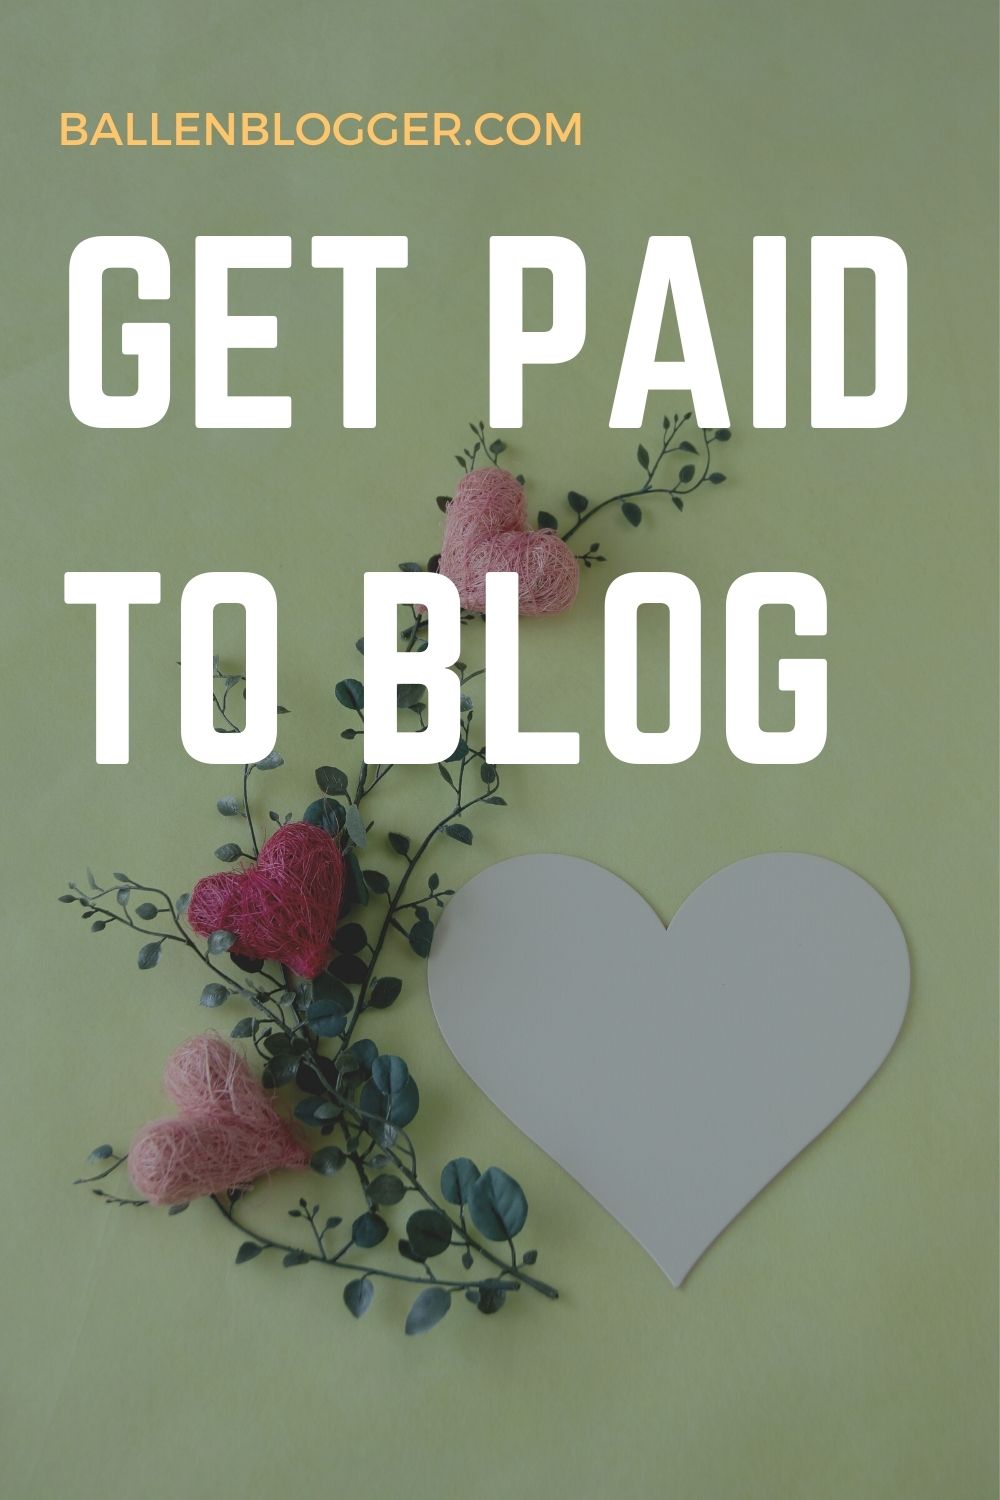 Blogging is a great way to supplement your income and, in some cases, make a full-time living. However, with so many websites on the market, it can seem a daunting proposition. 